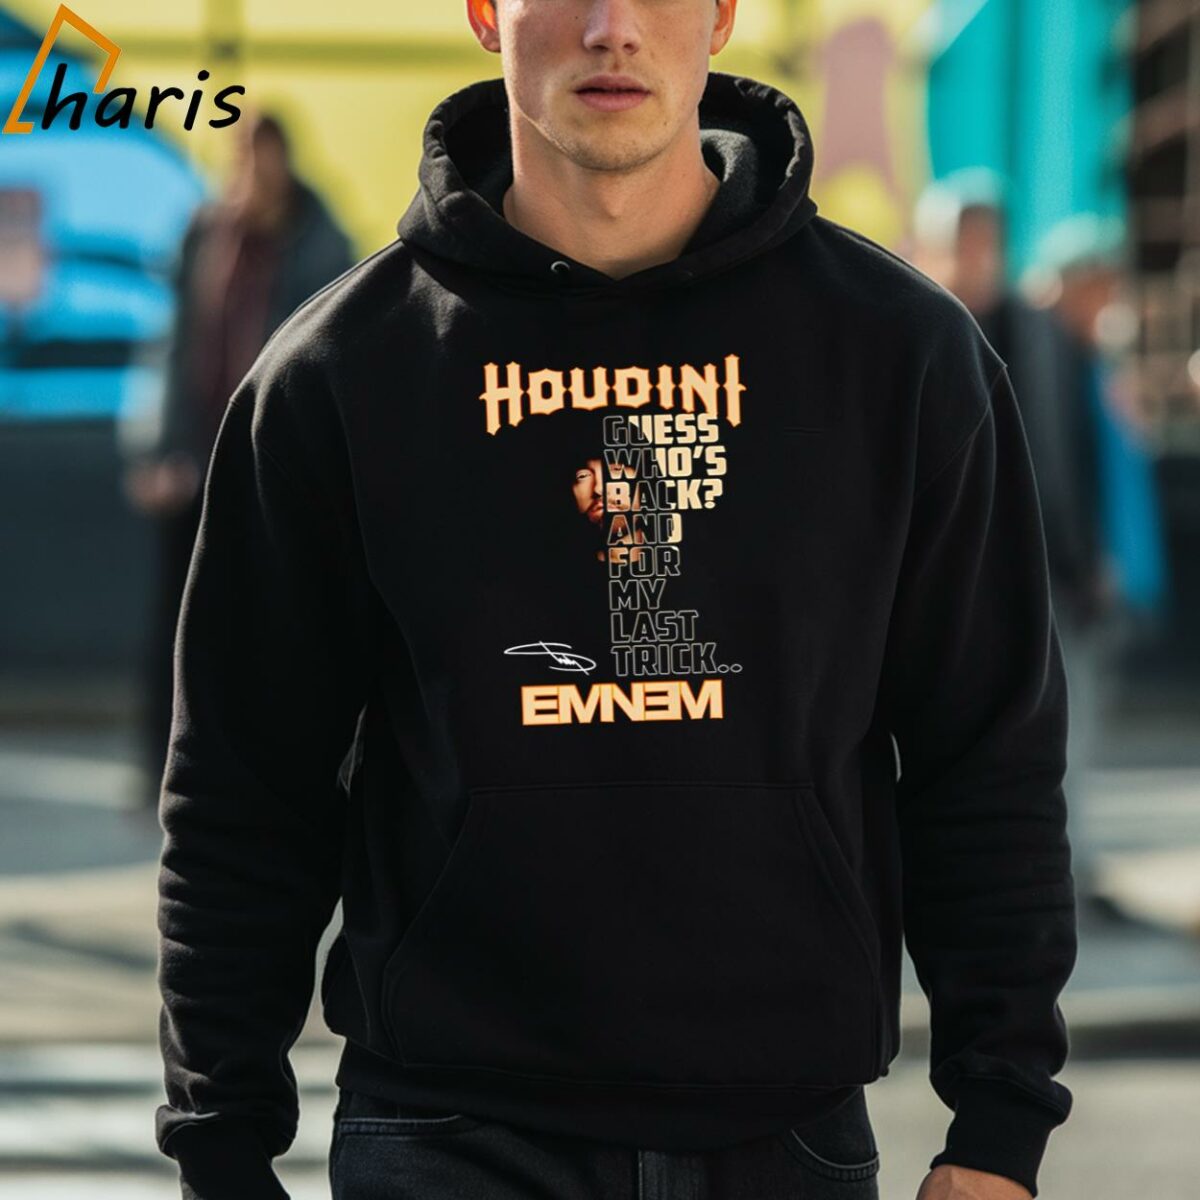 Houdini Guess Whos Back And For My Last Trick Eminem Shirt 3 hoodie